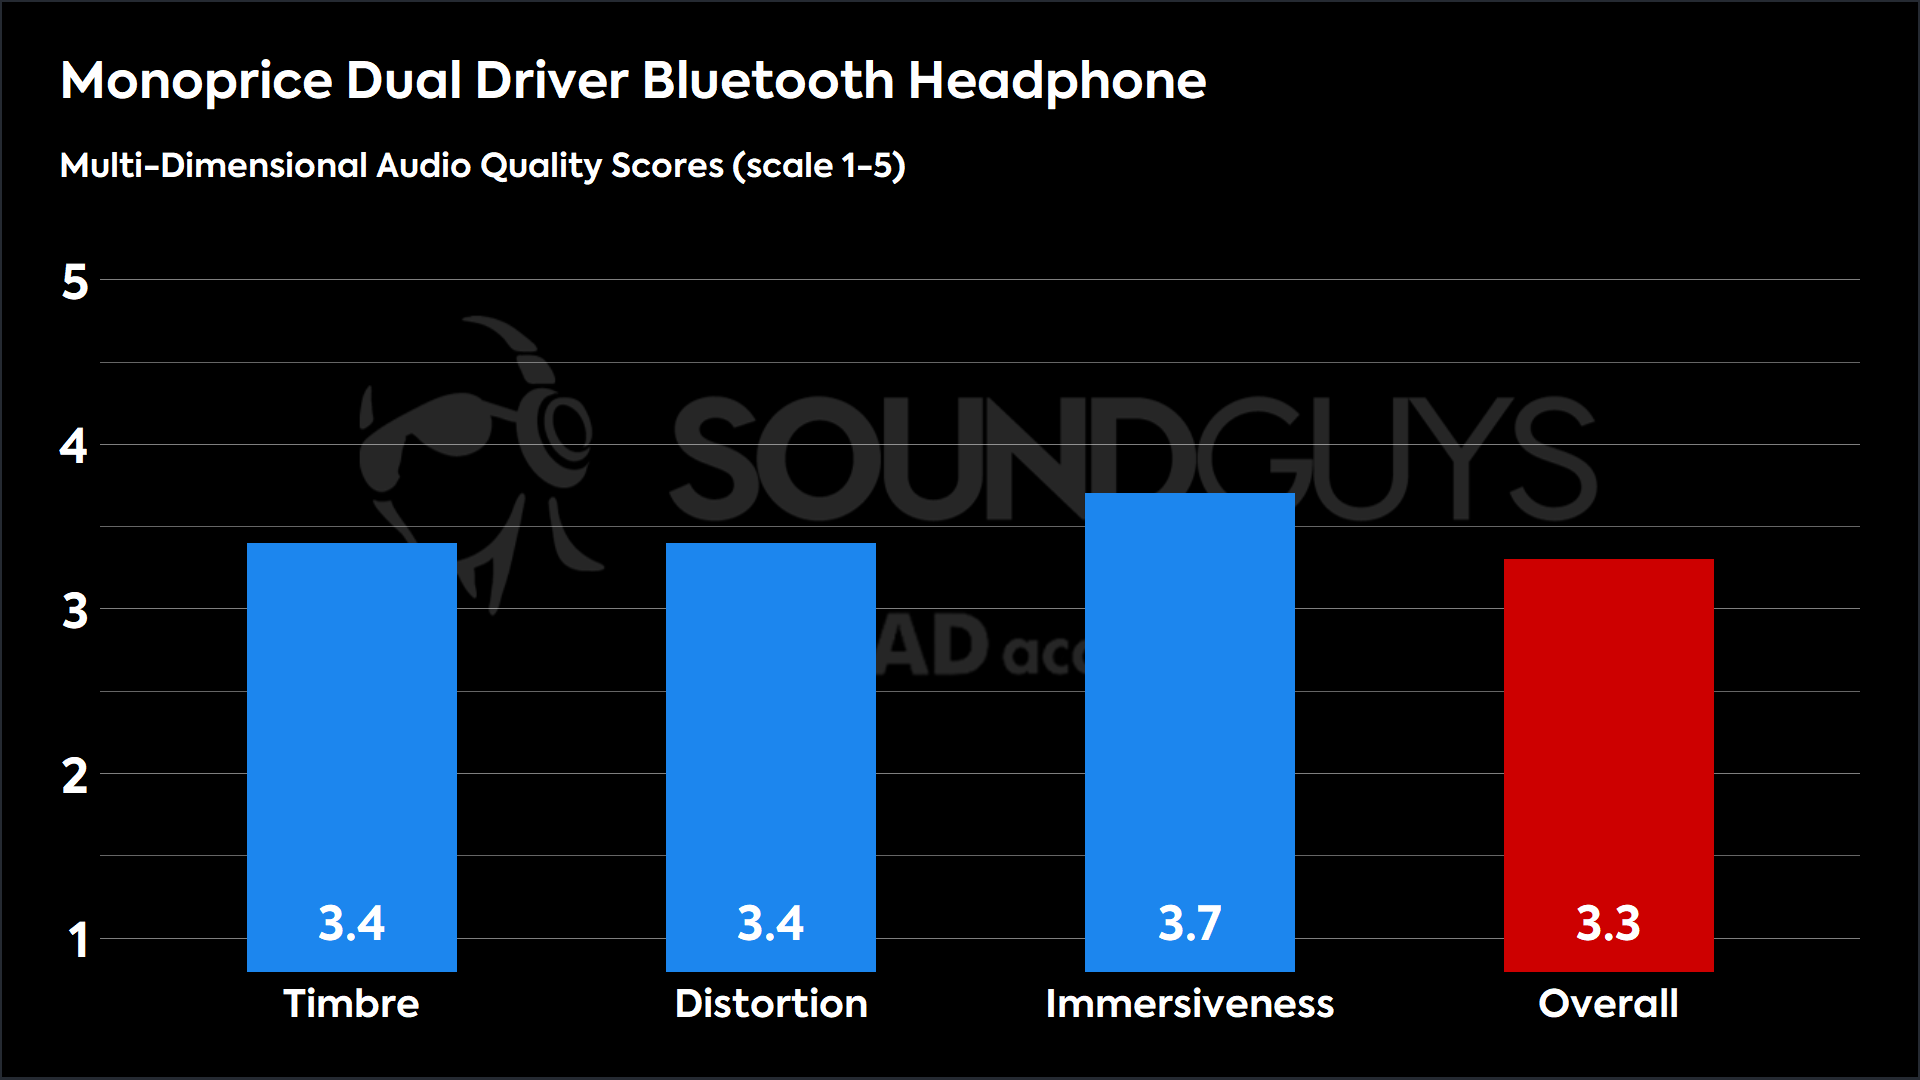 This chart shows the MDAQS results for the Monoprice Dual Driver Bluetooth Headphone in Default mode. The Timbre score is 3.4, The Distortion score is 3.4, the Immersiveness score is 3.7, and the Overall Score is 3.3).